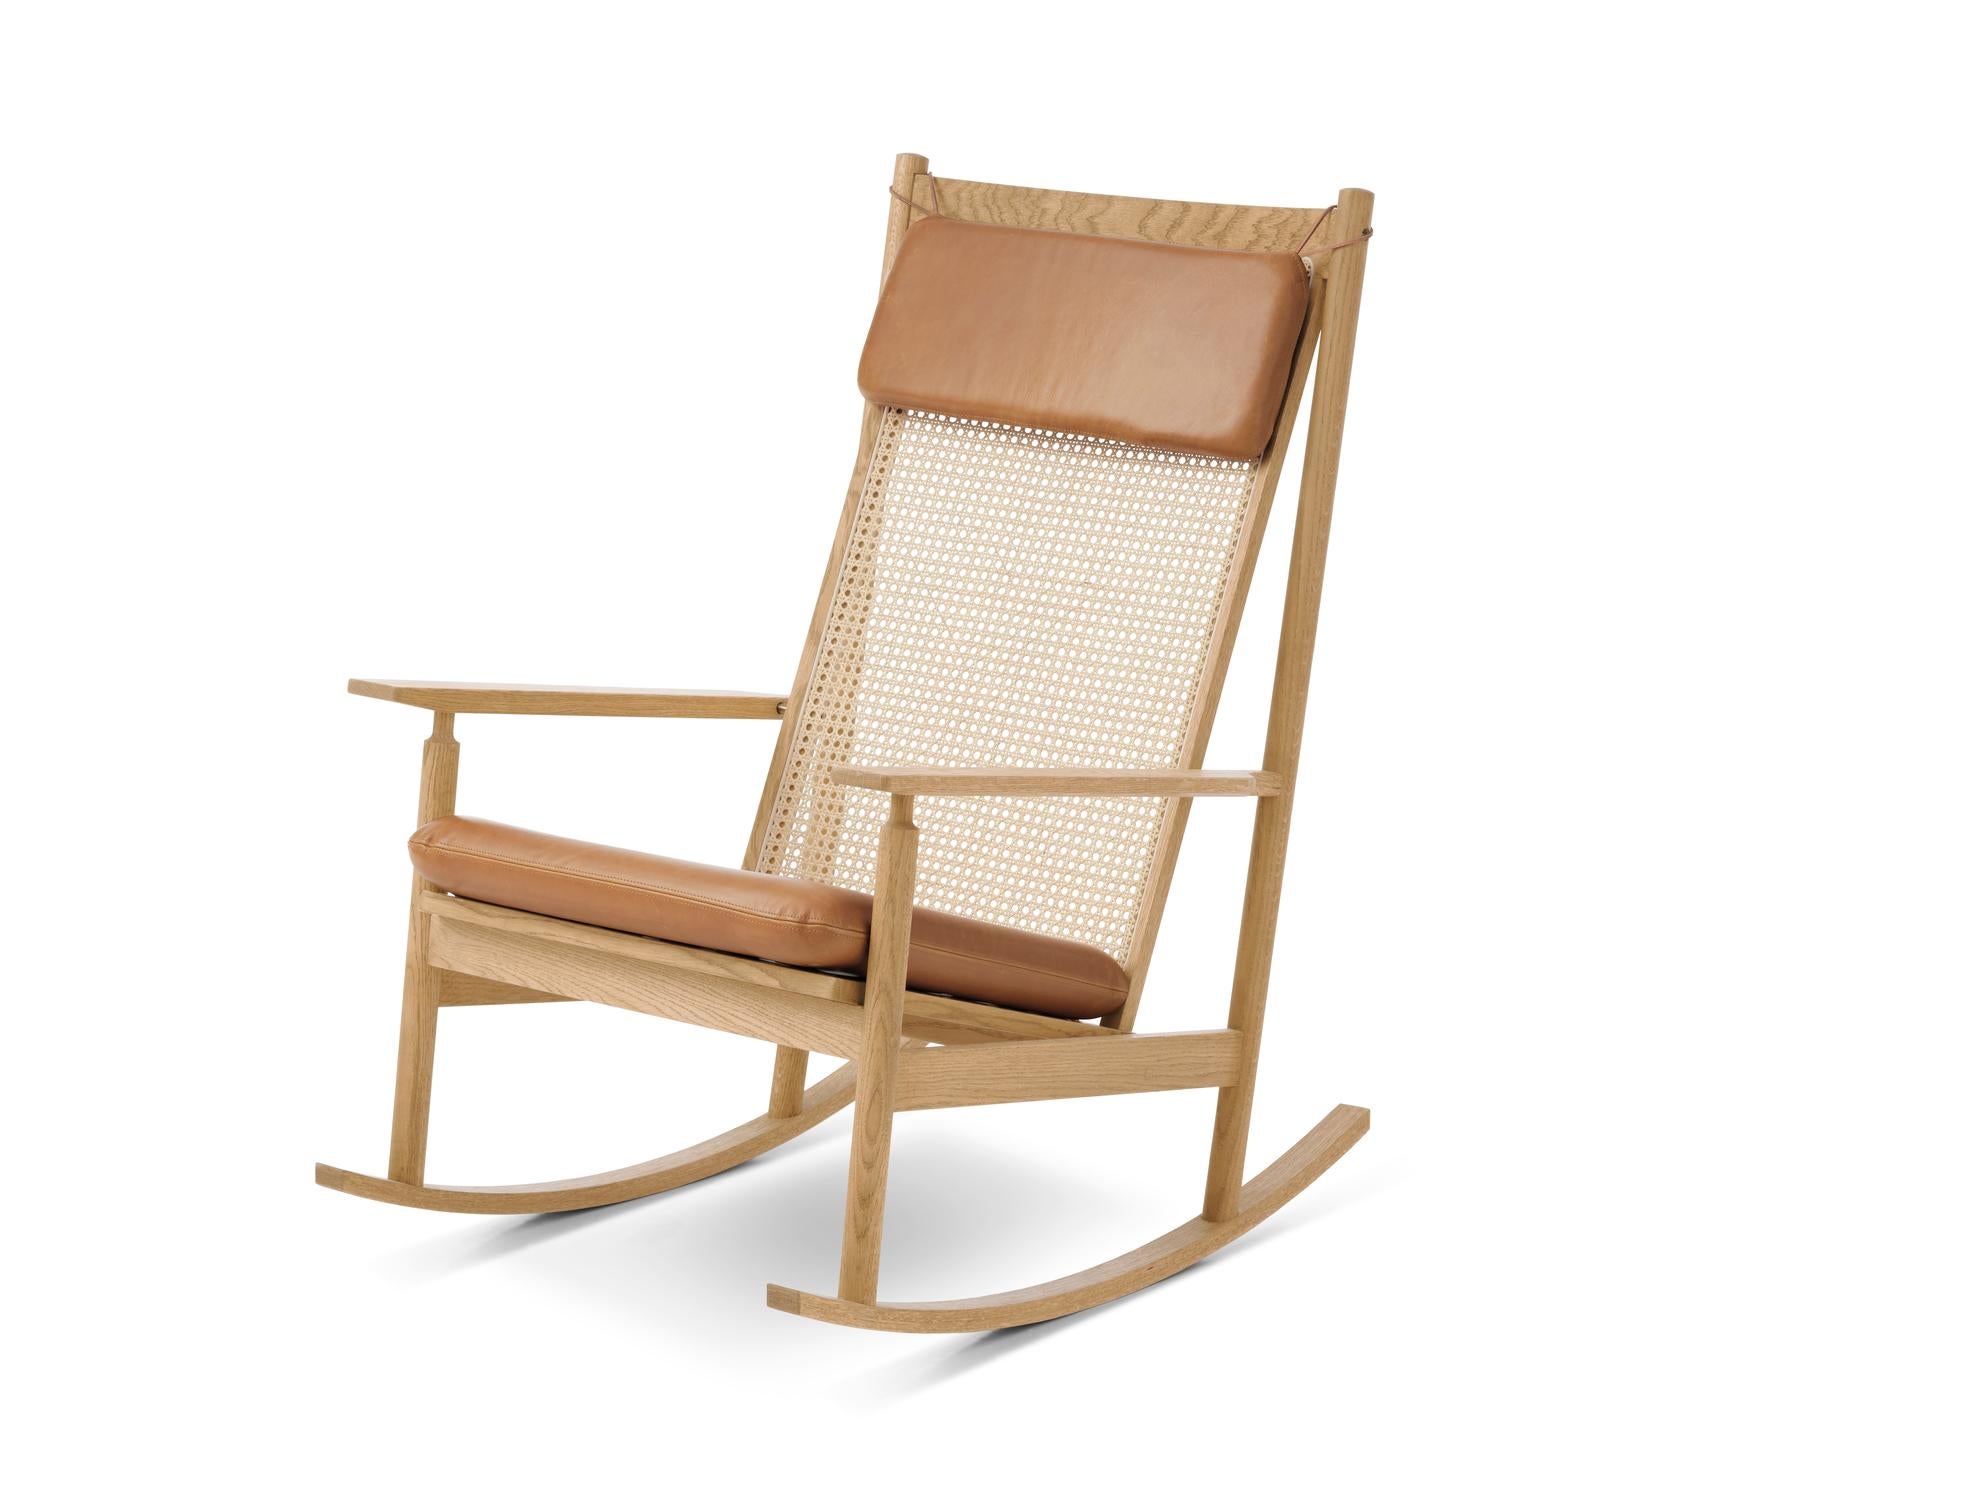 Swing rocking chair silk oak camel by Warm Nordic
Dimensions: D91 x W68 x H 103 cm
Material: Wood, Foam, Rubber springs, French cane, Textile or leather upholstery, Oak
Weight: 16.5 kg
Also available in different colours, materials and